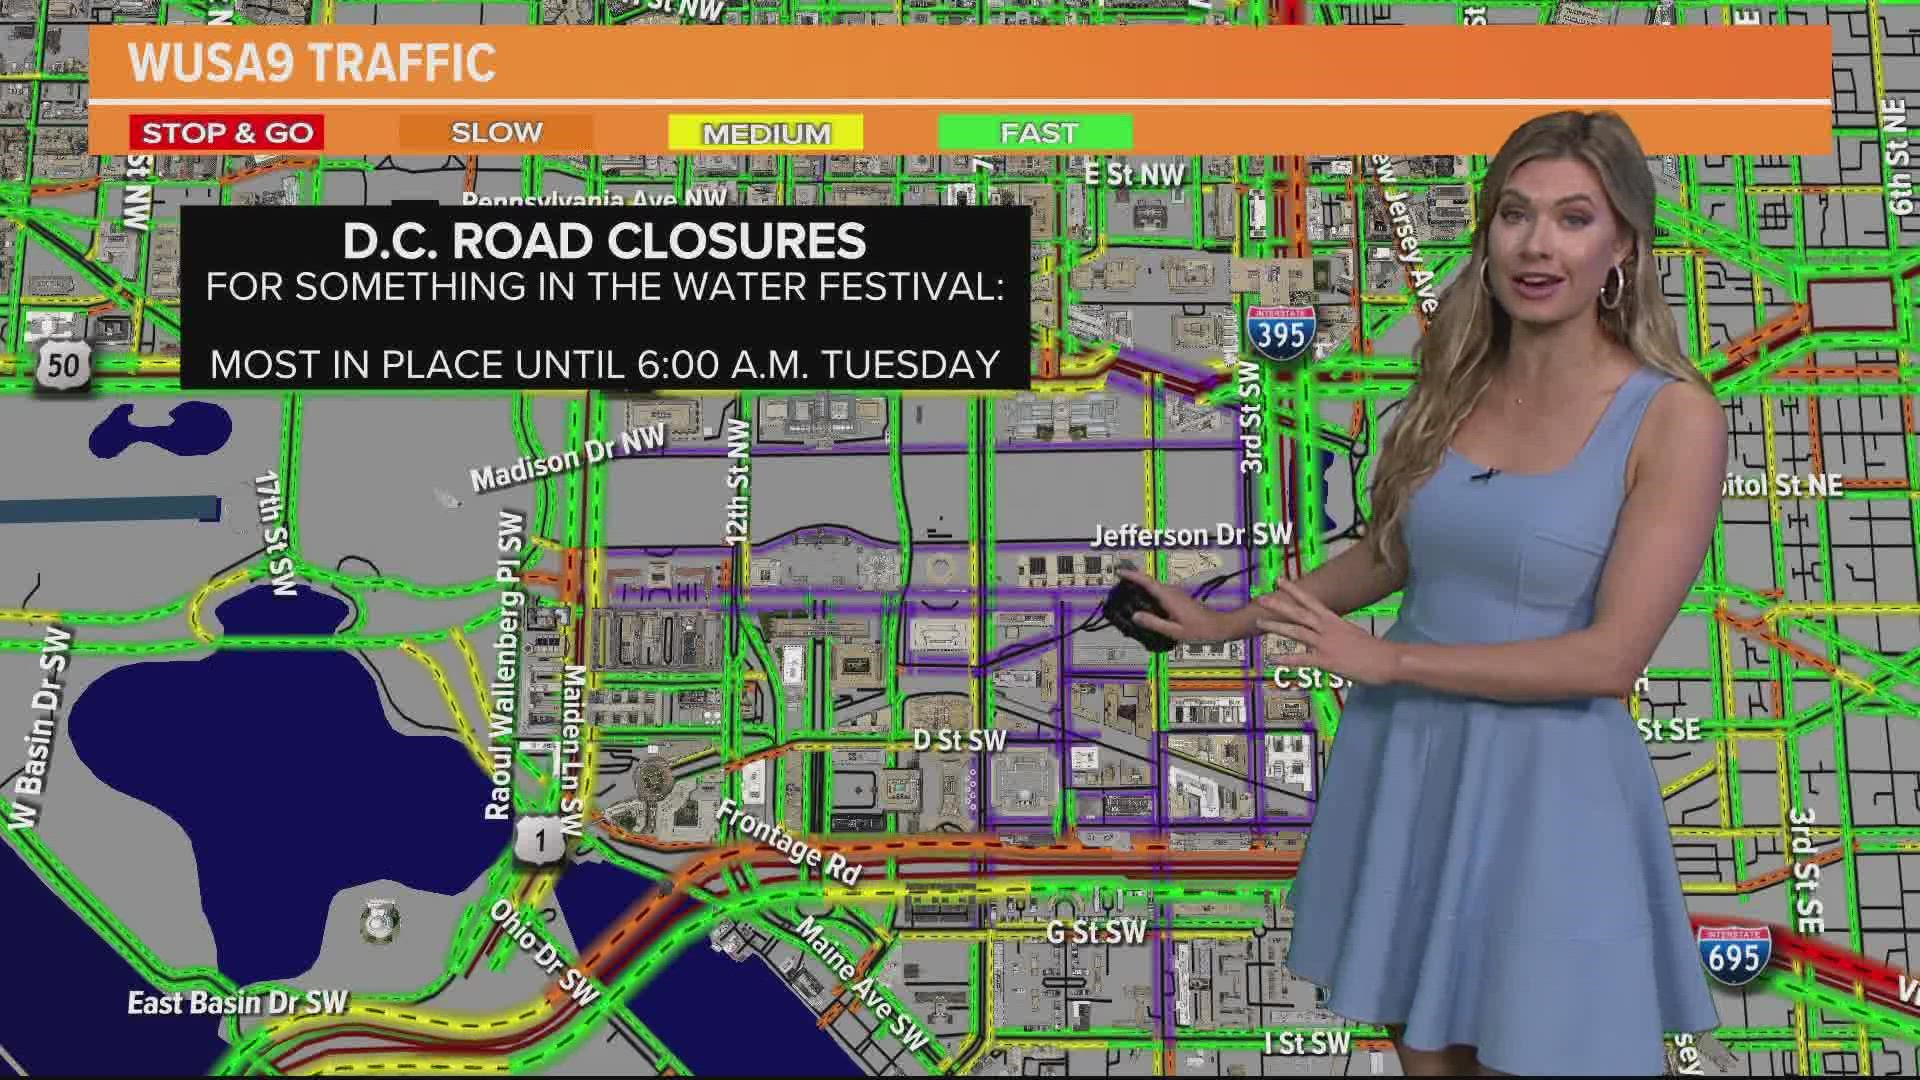 Drivers can expect for road closures until Tuesday morning in DC.